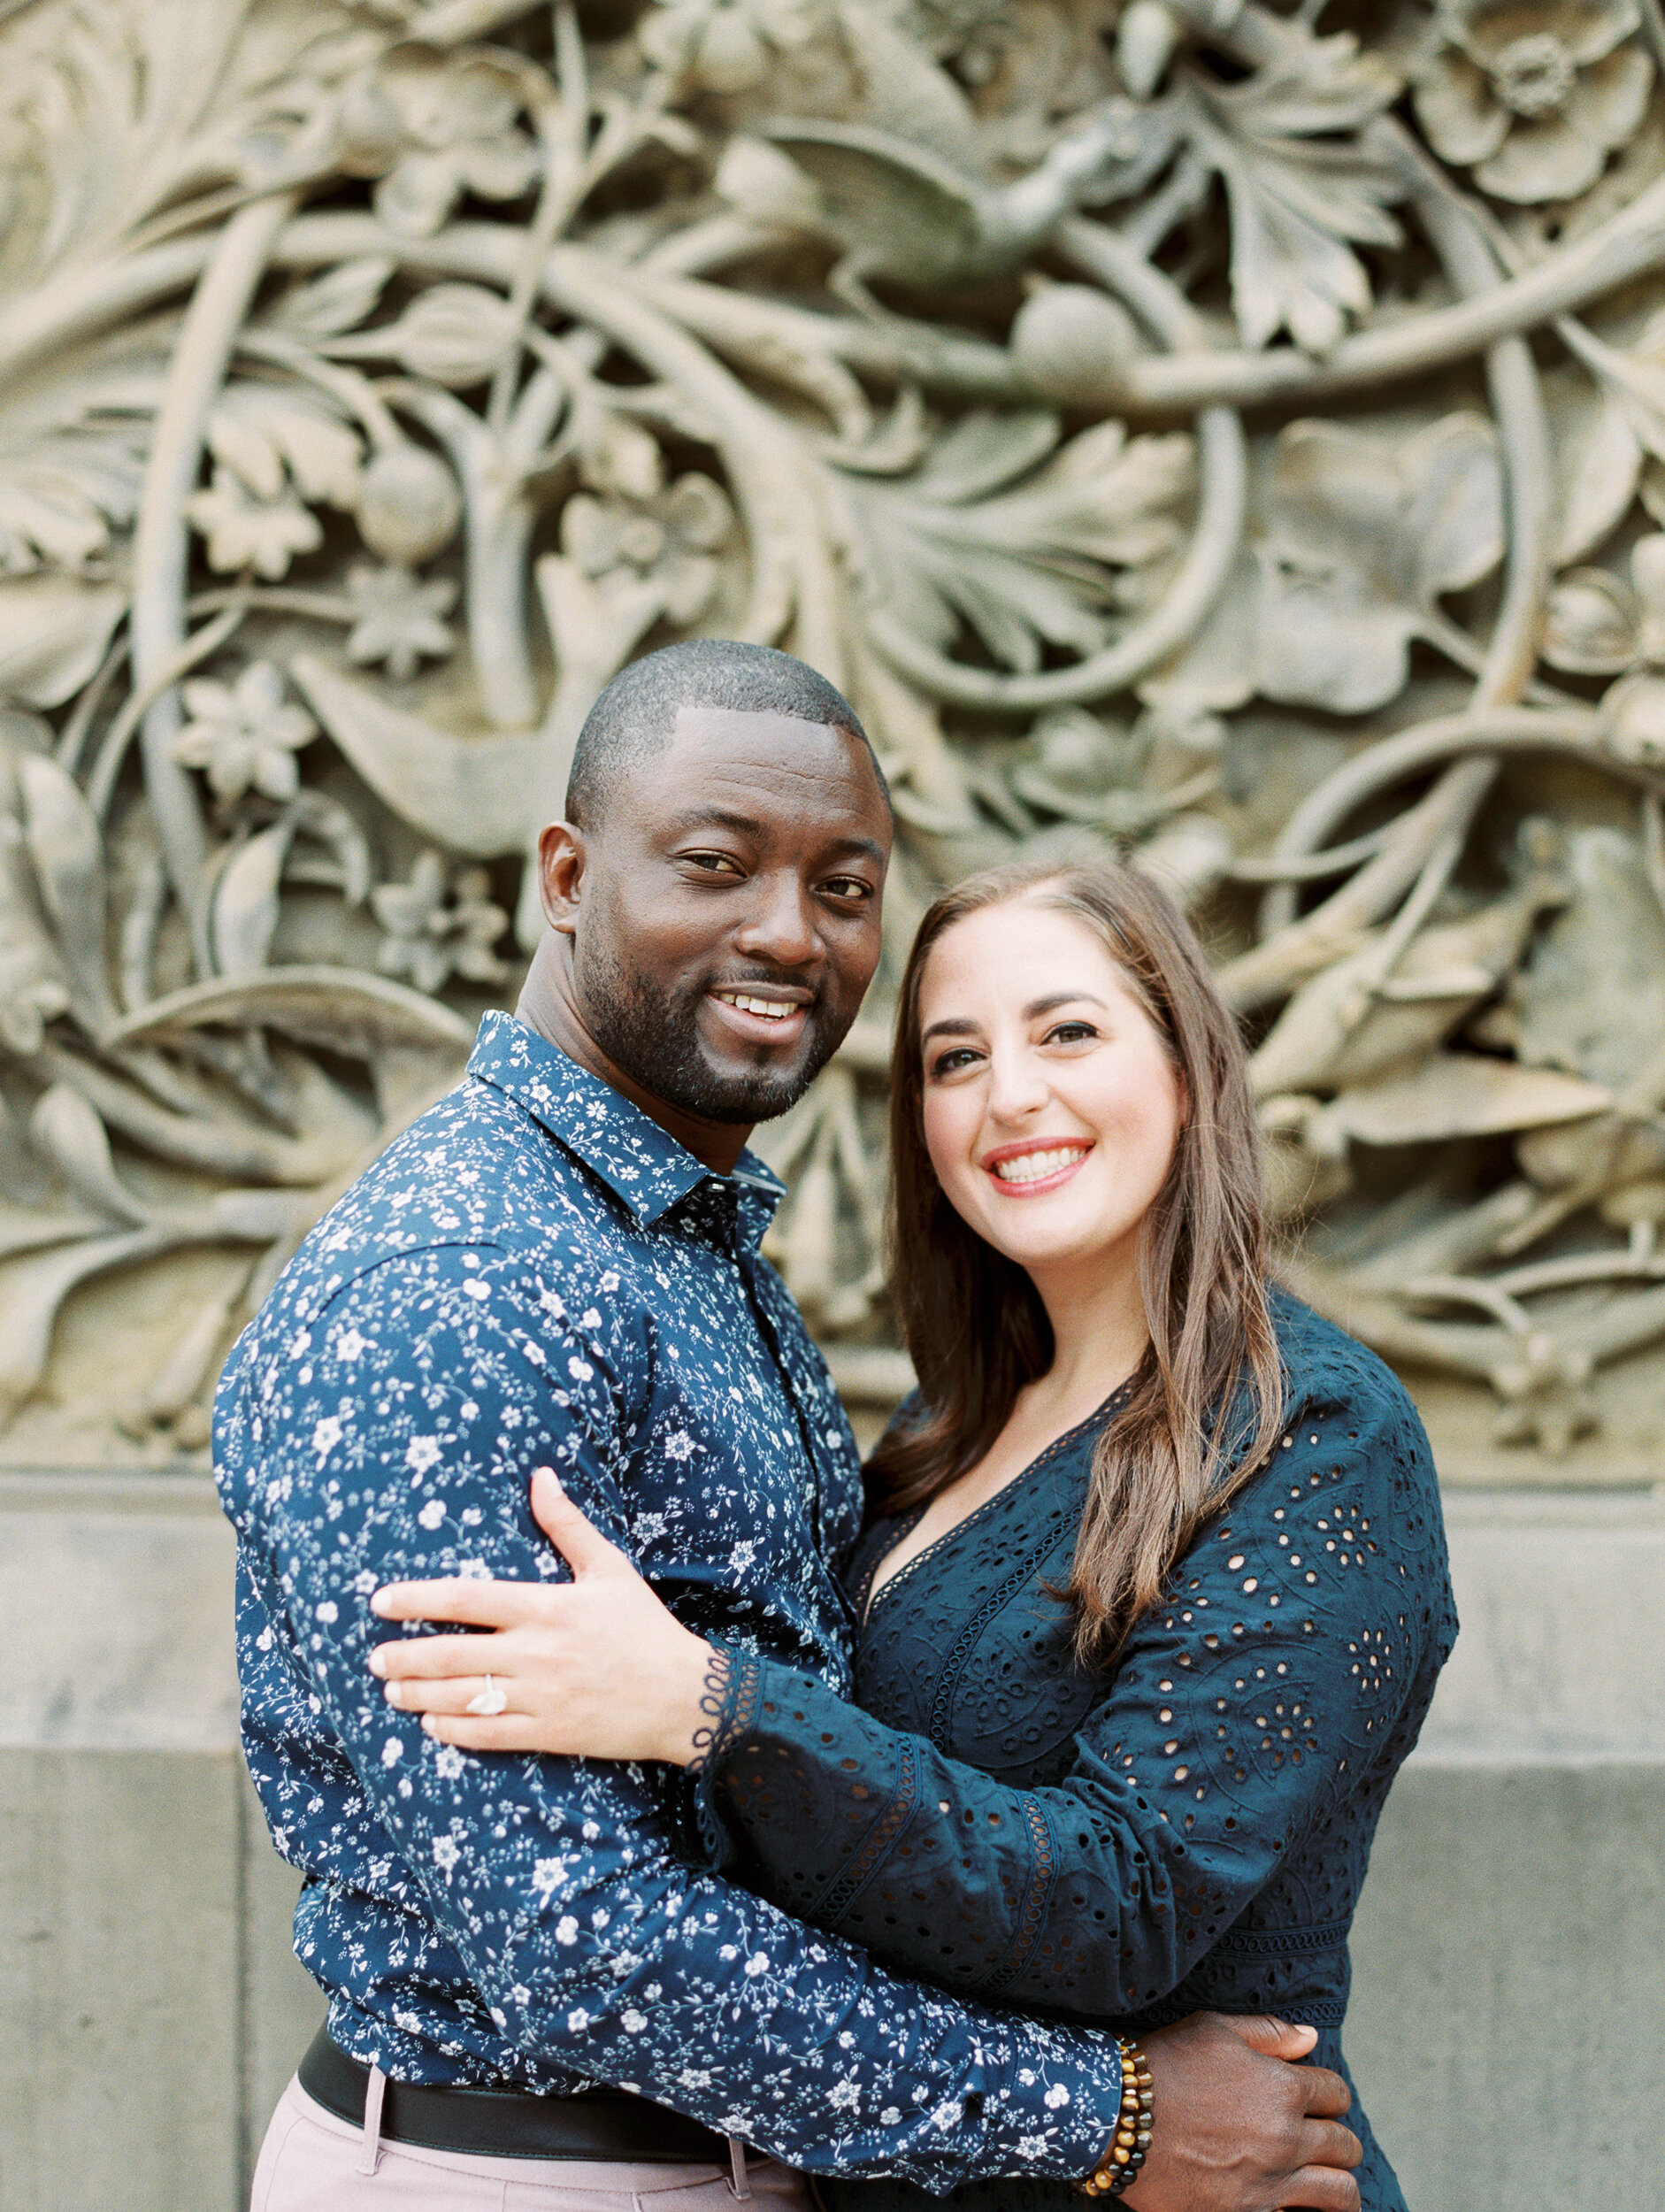 Central Park Engagement Session in New York City